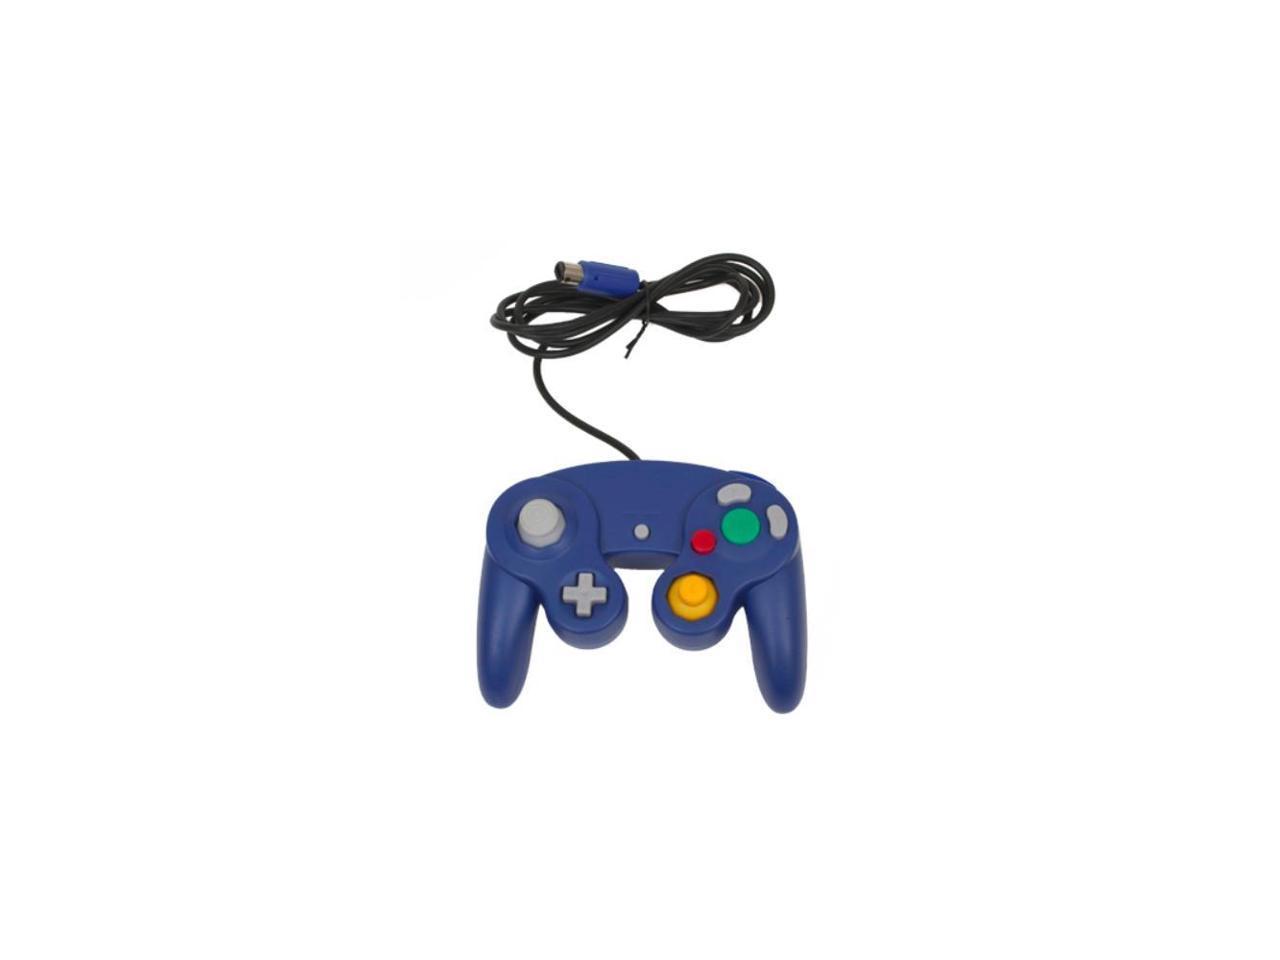 can i use gamecube controller for wii u